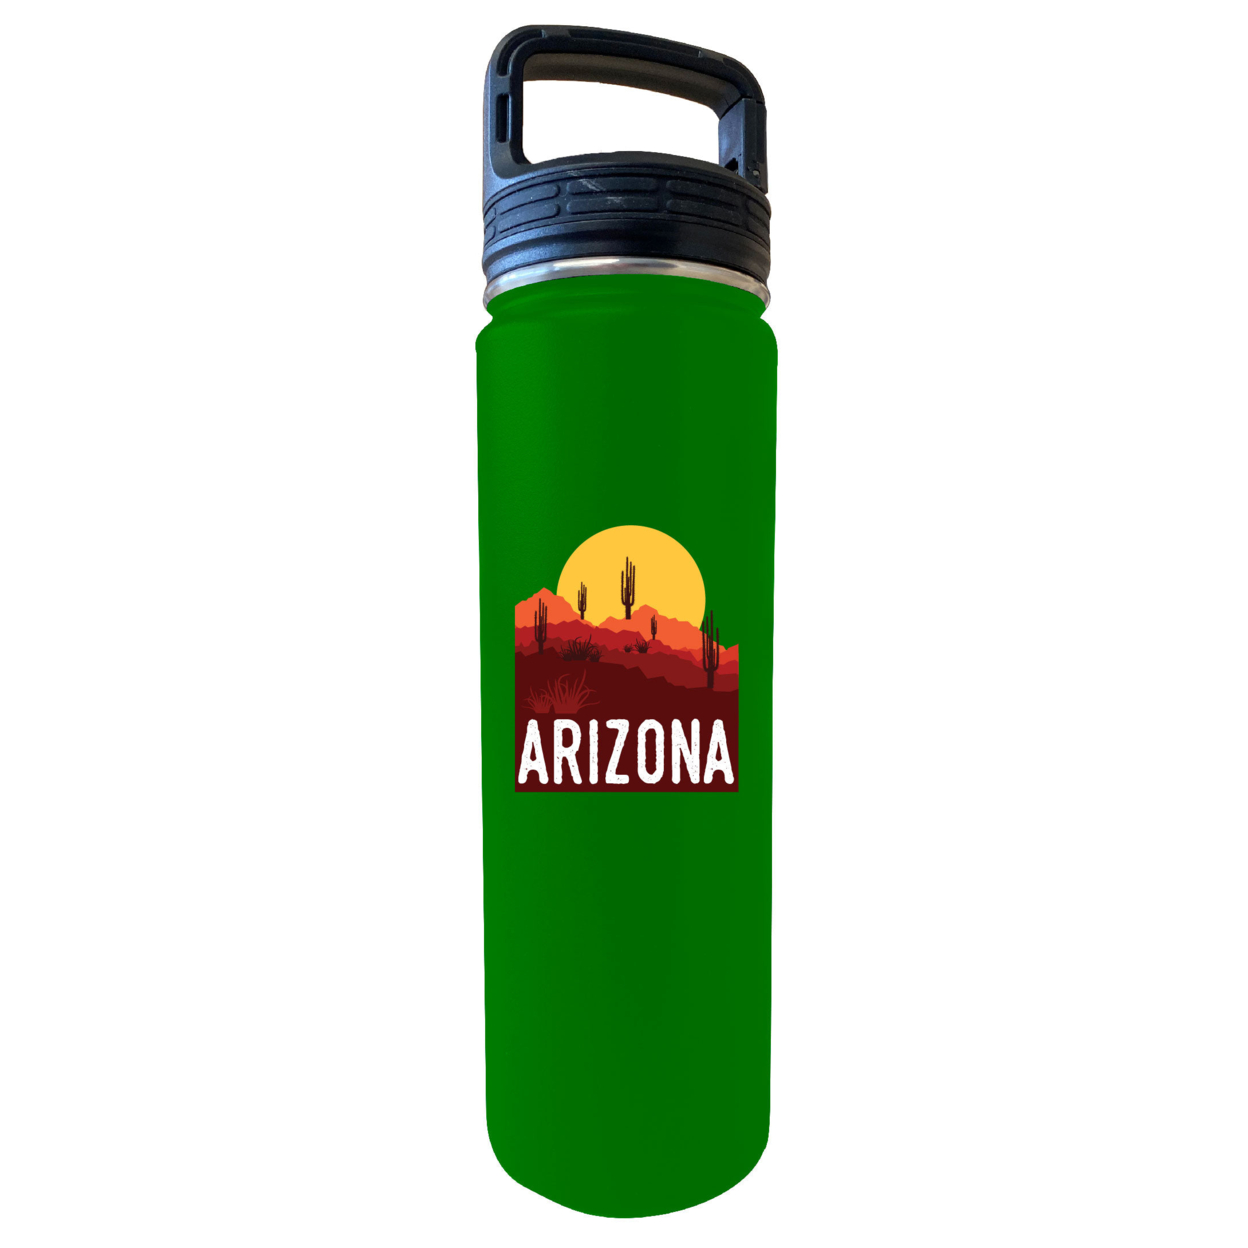 Arizona Souvenir Desert 32 Oz Engraved Insulated Double Wall Stainless Steel Water Bottle Tumbler - Red